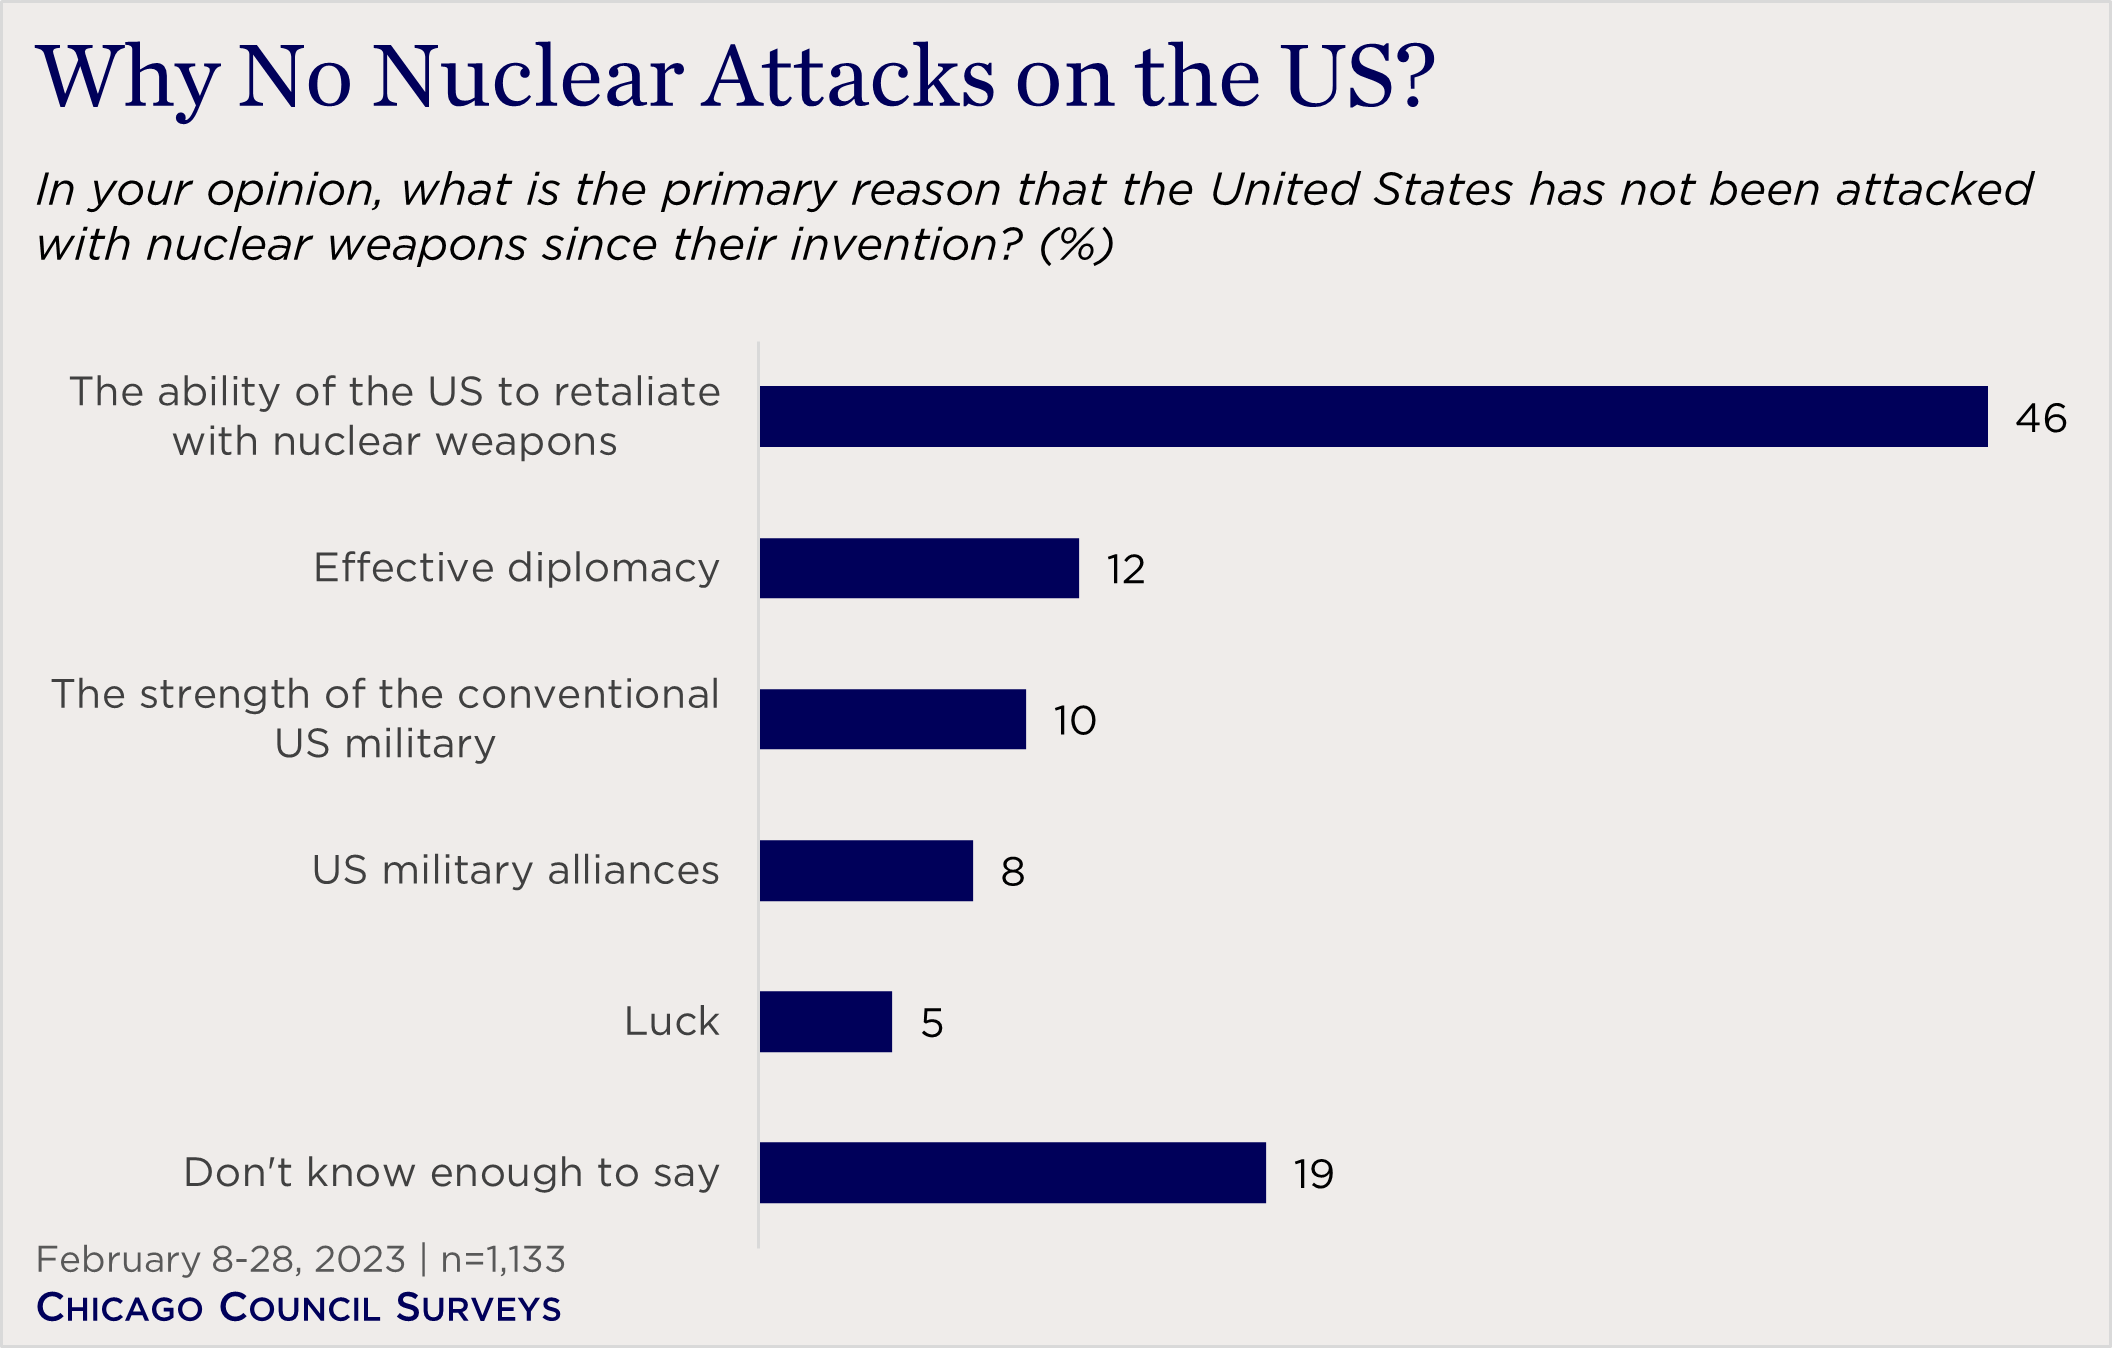 bar chart showing views on why there hasn't been a nuclear attack on the US